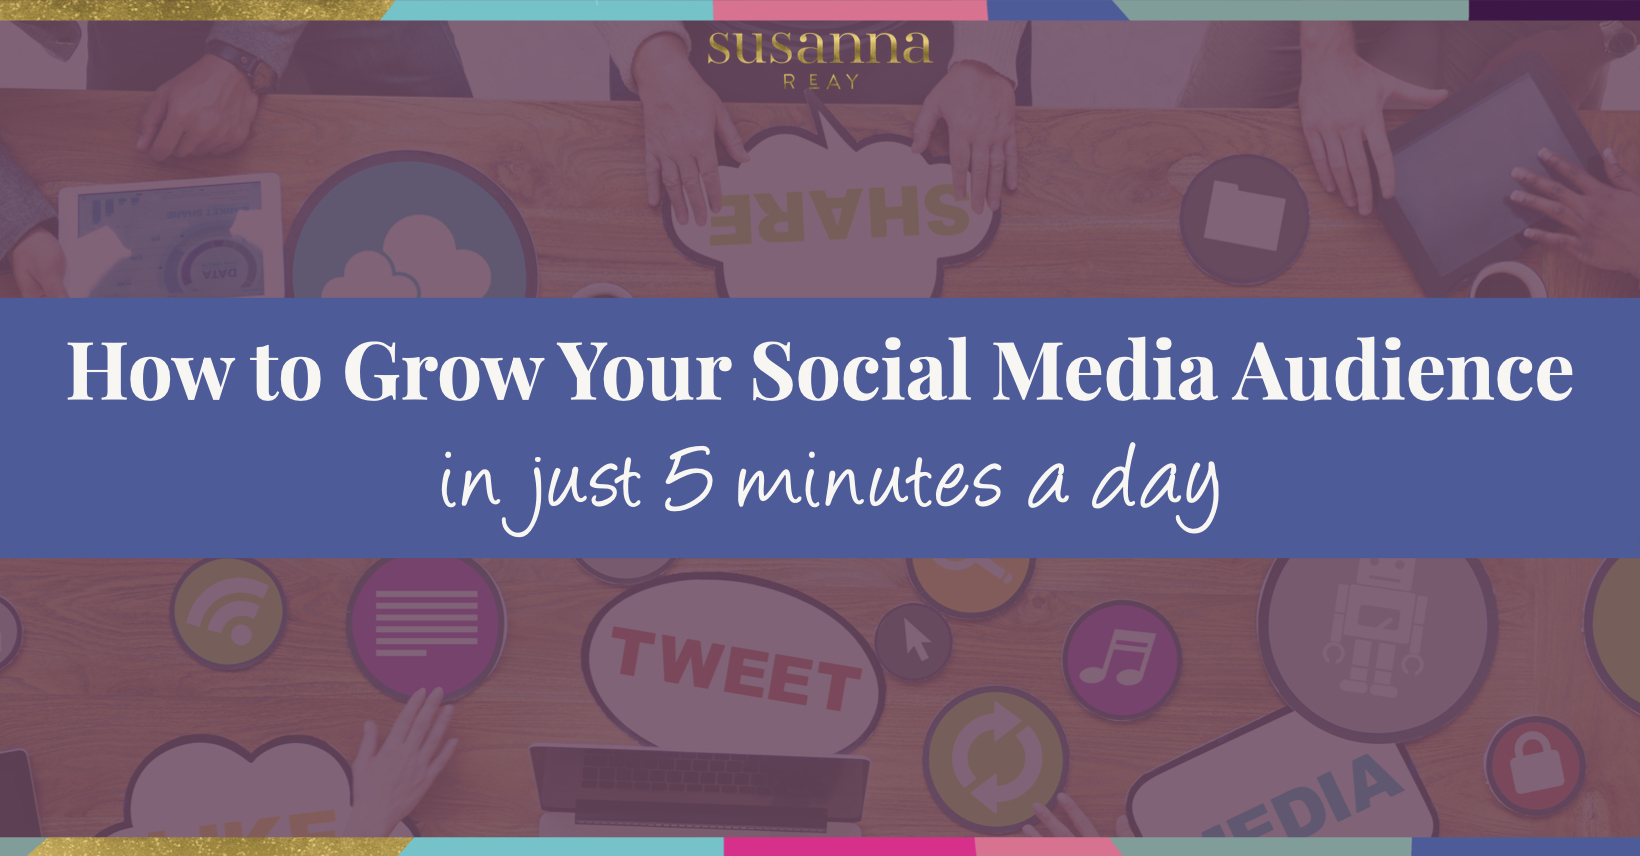 How to grow your social media audience in just 5 minutes a day